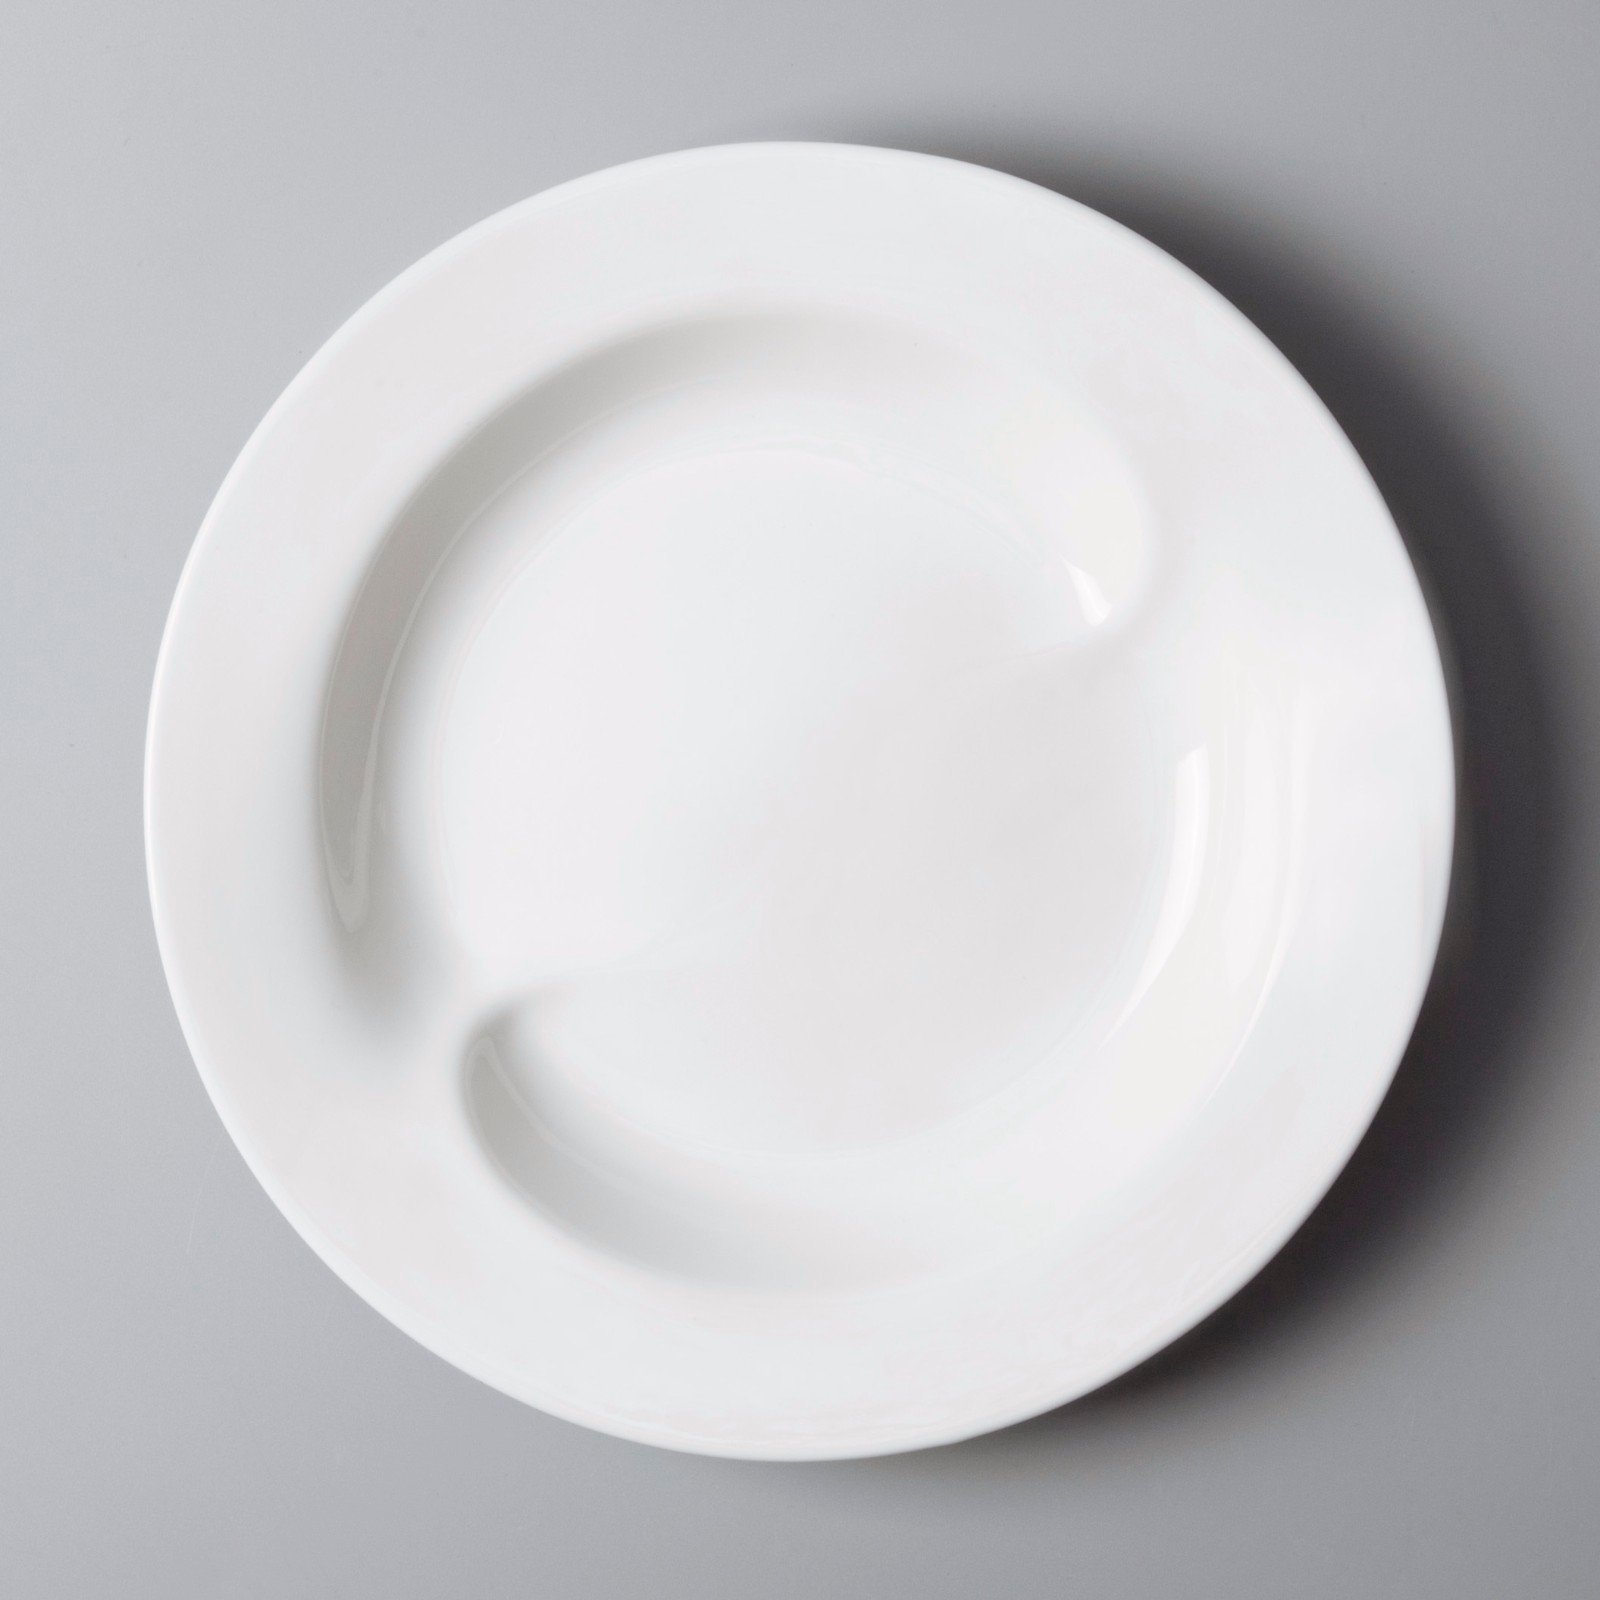 Two Eight Brand royalty style white porcelain tableware